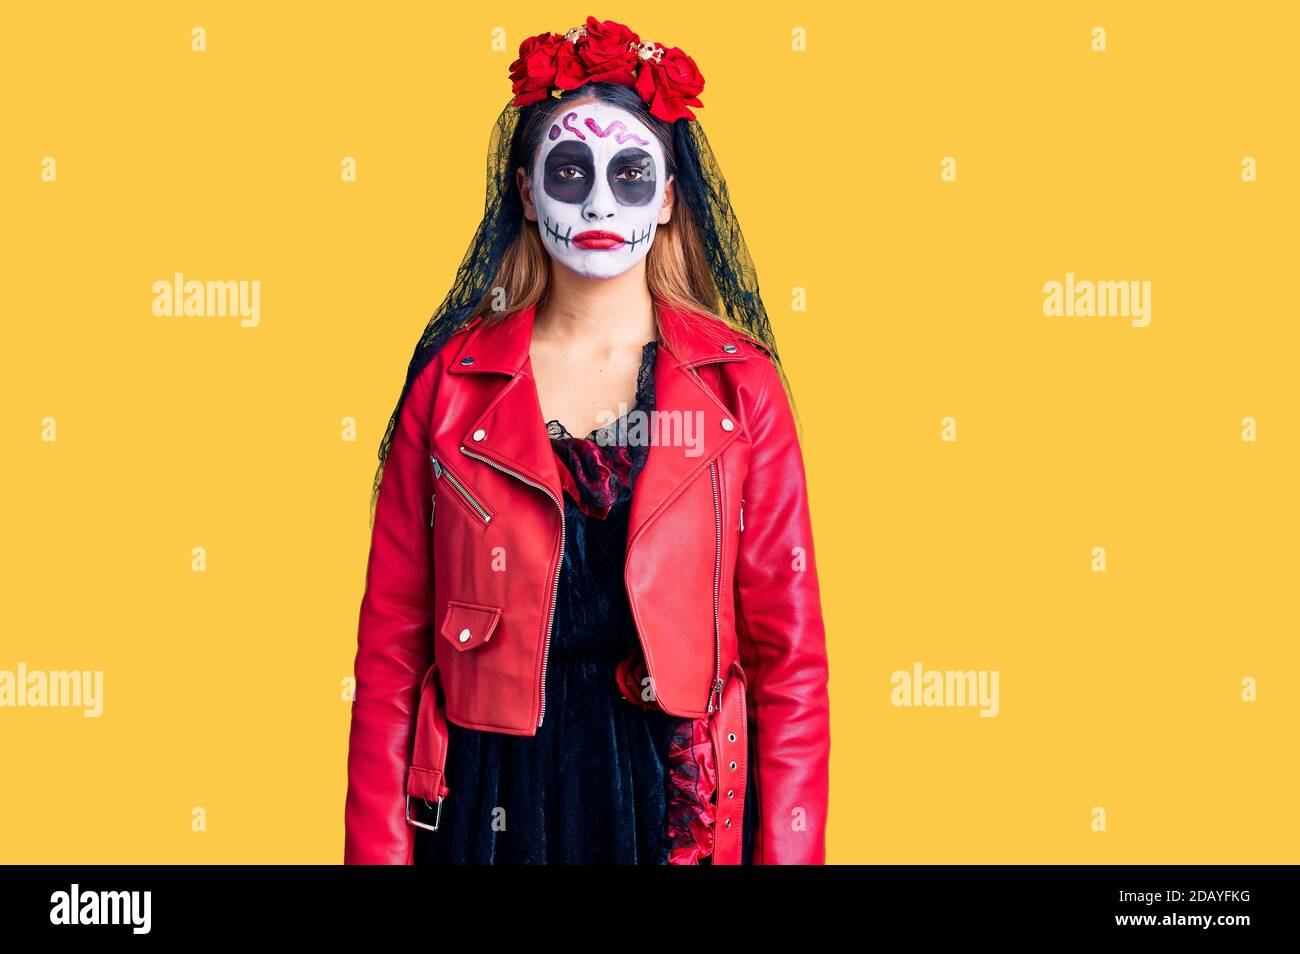 Woman wearing day of the dead costume over background depressed